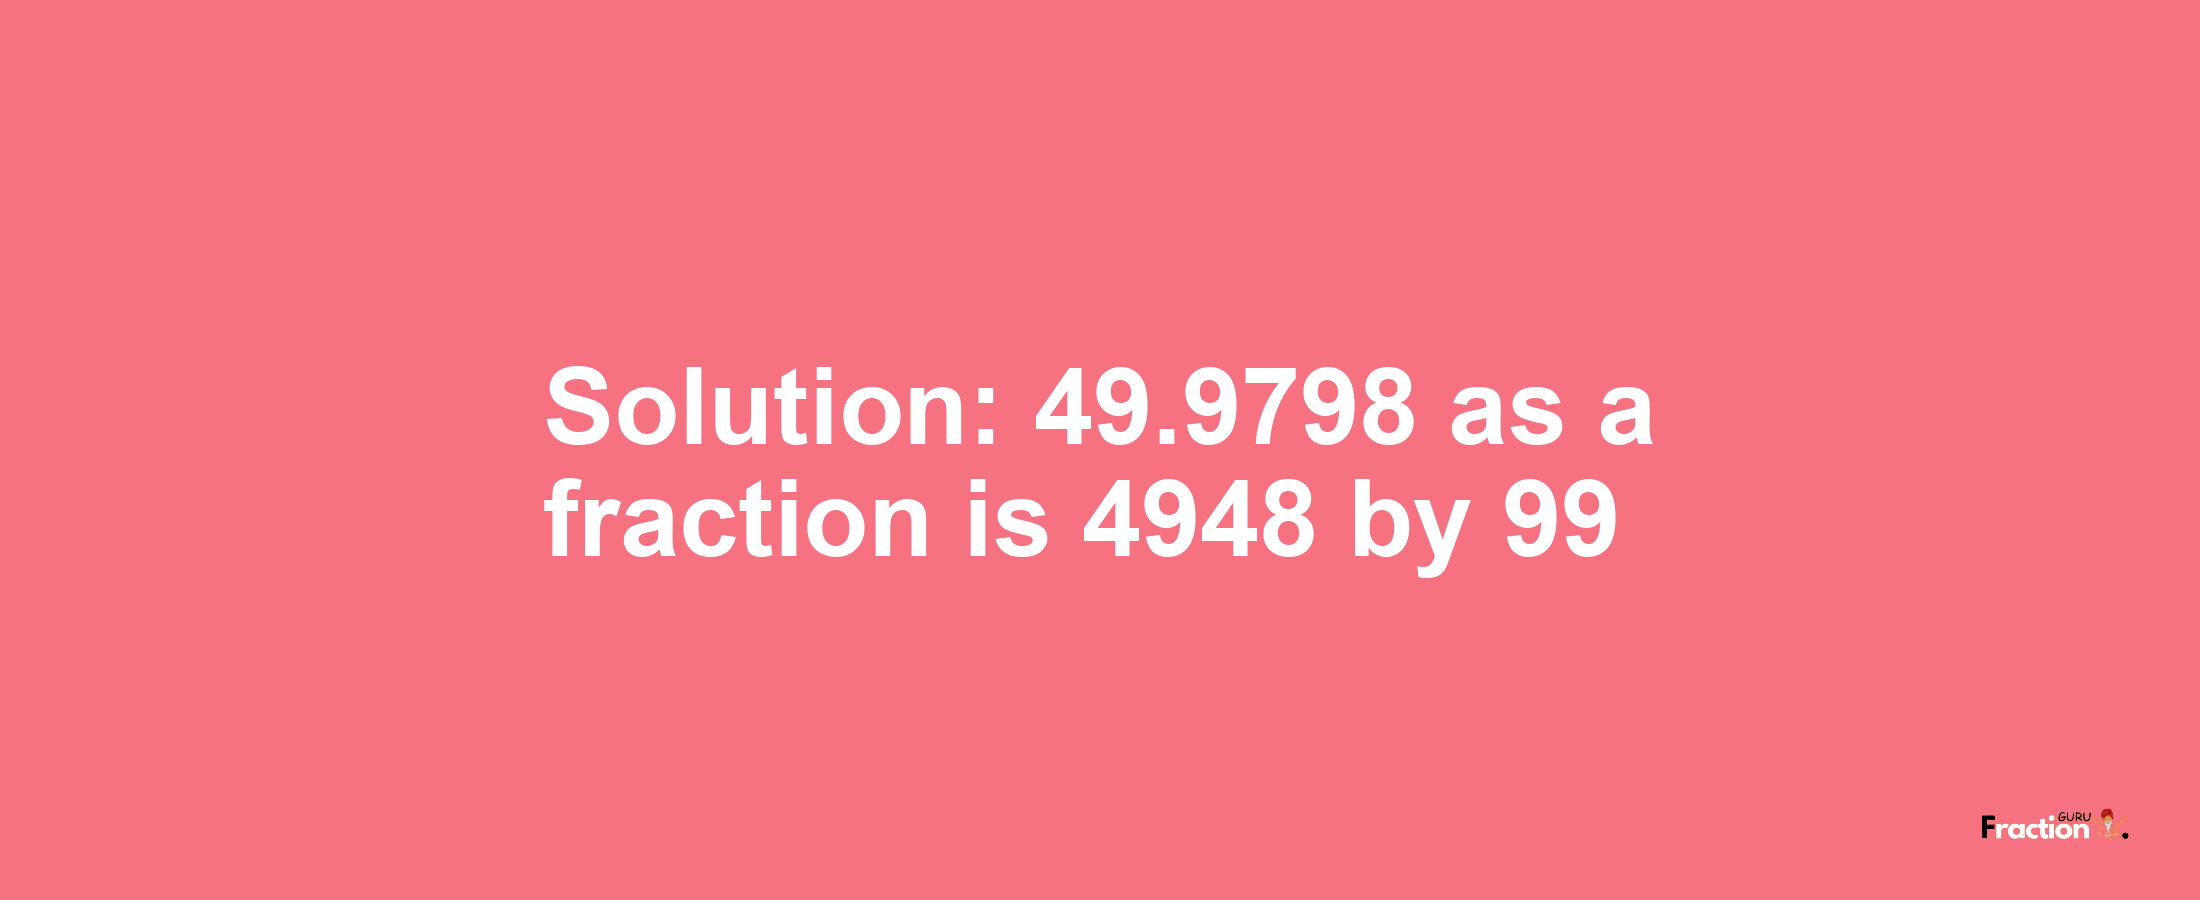 Solution:49.9798 as a fraction is 4948/99